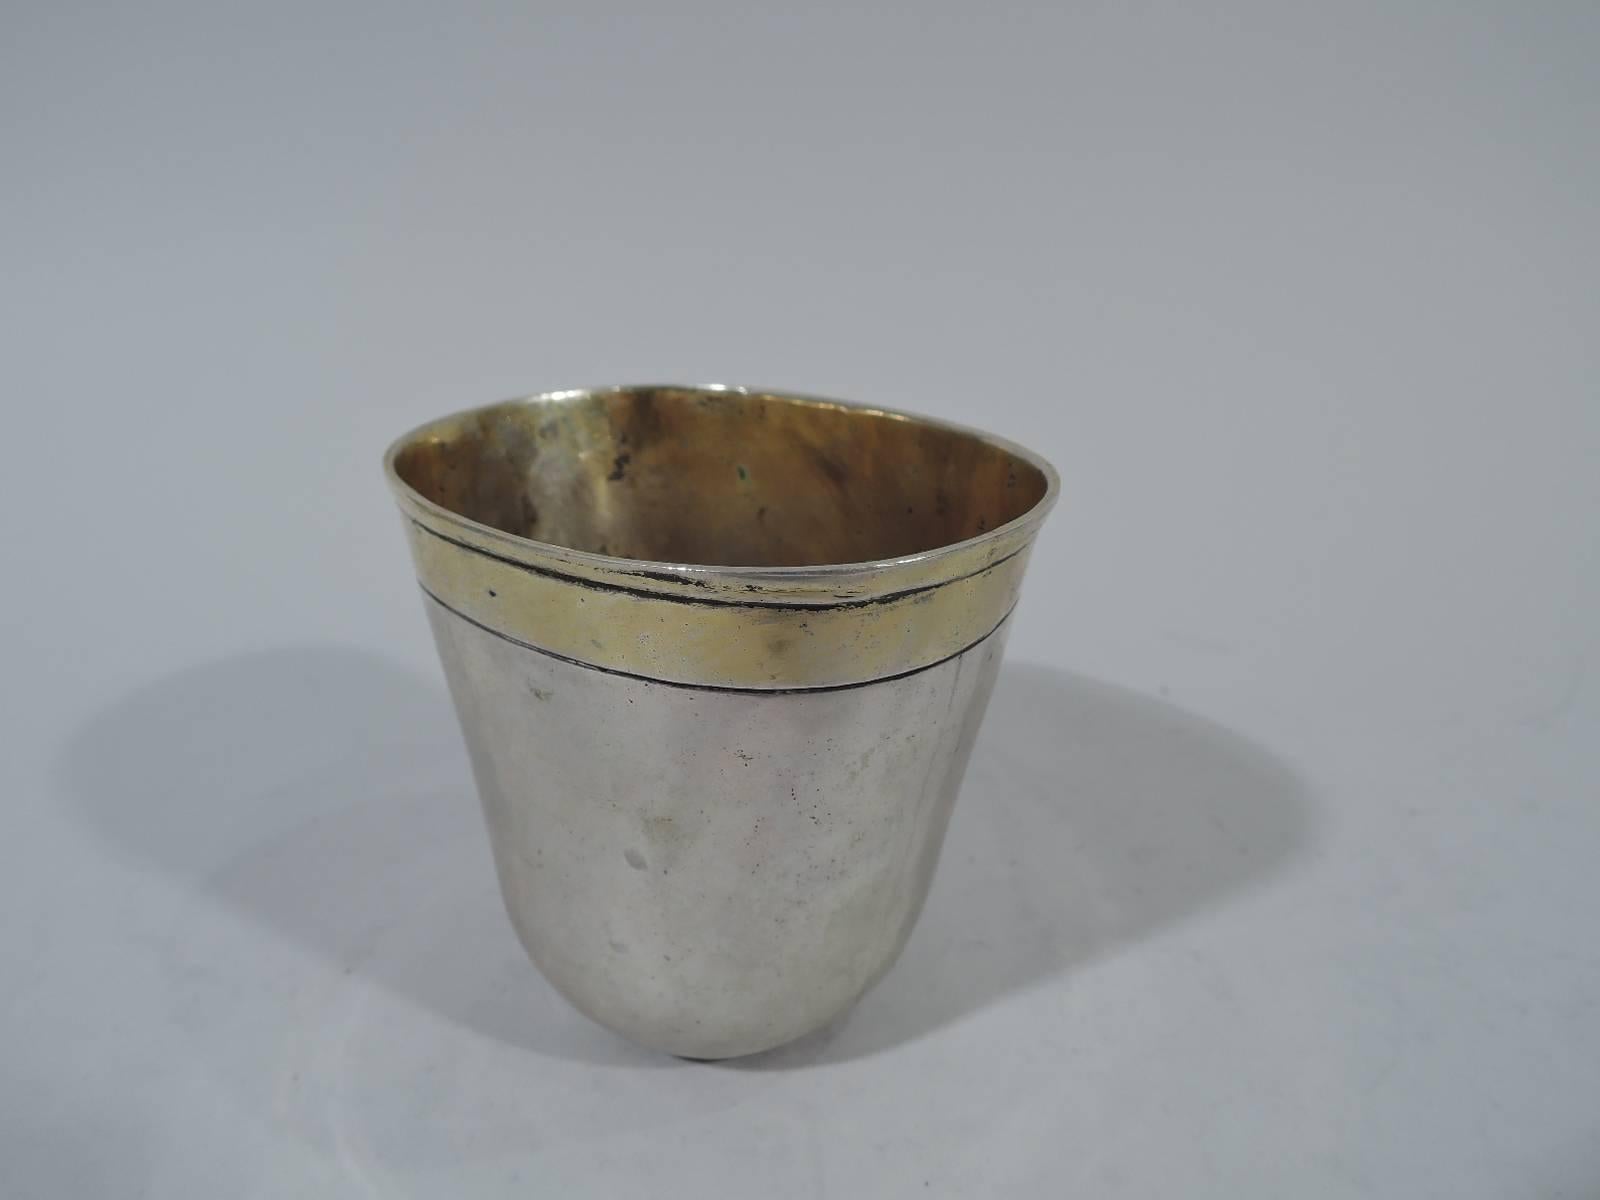 German silver beaker, 18th century ovoid with slightly flattened form. Rim has incised and gilt band. A beautiful piece rich in history. Nuremberg hallmark. Weight: 4.5 troy ounces.